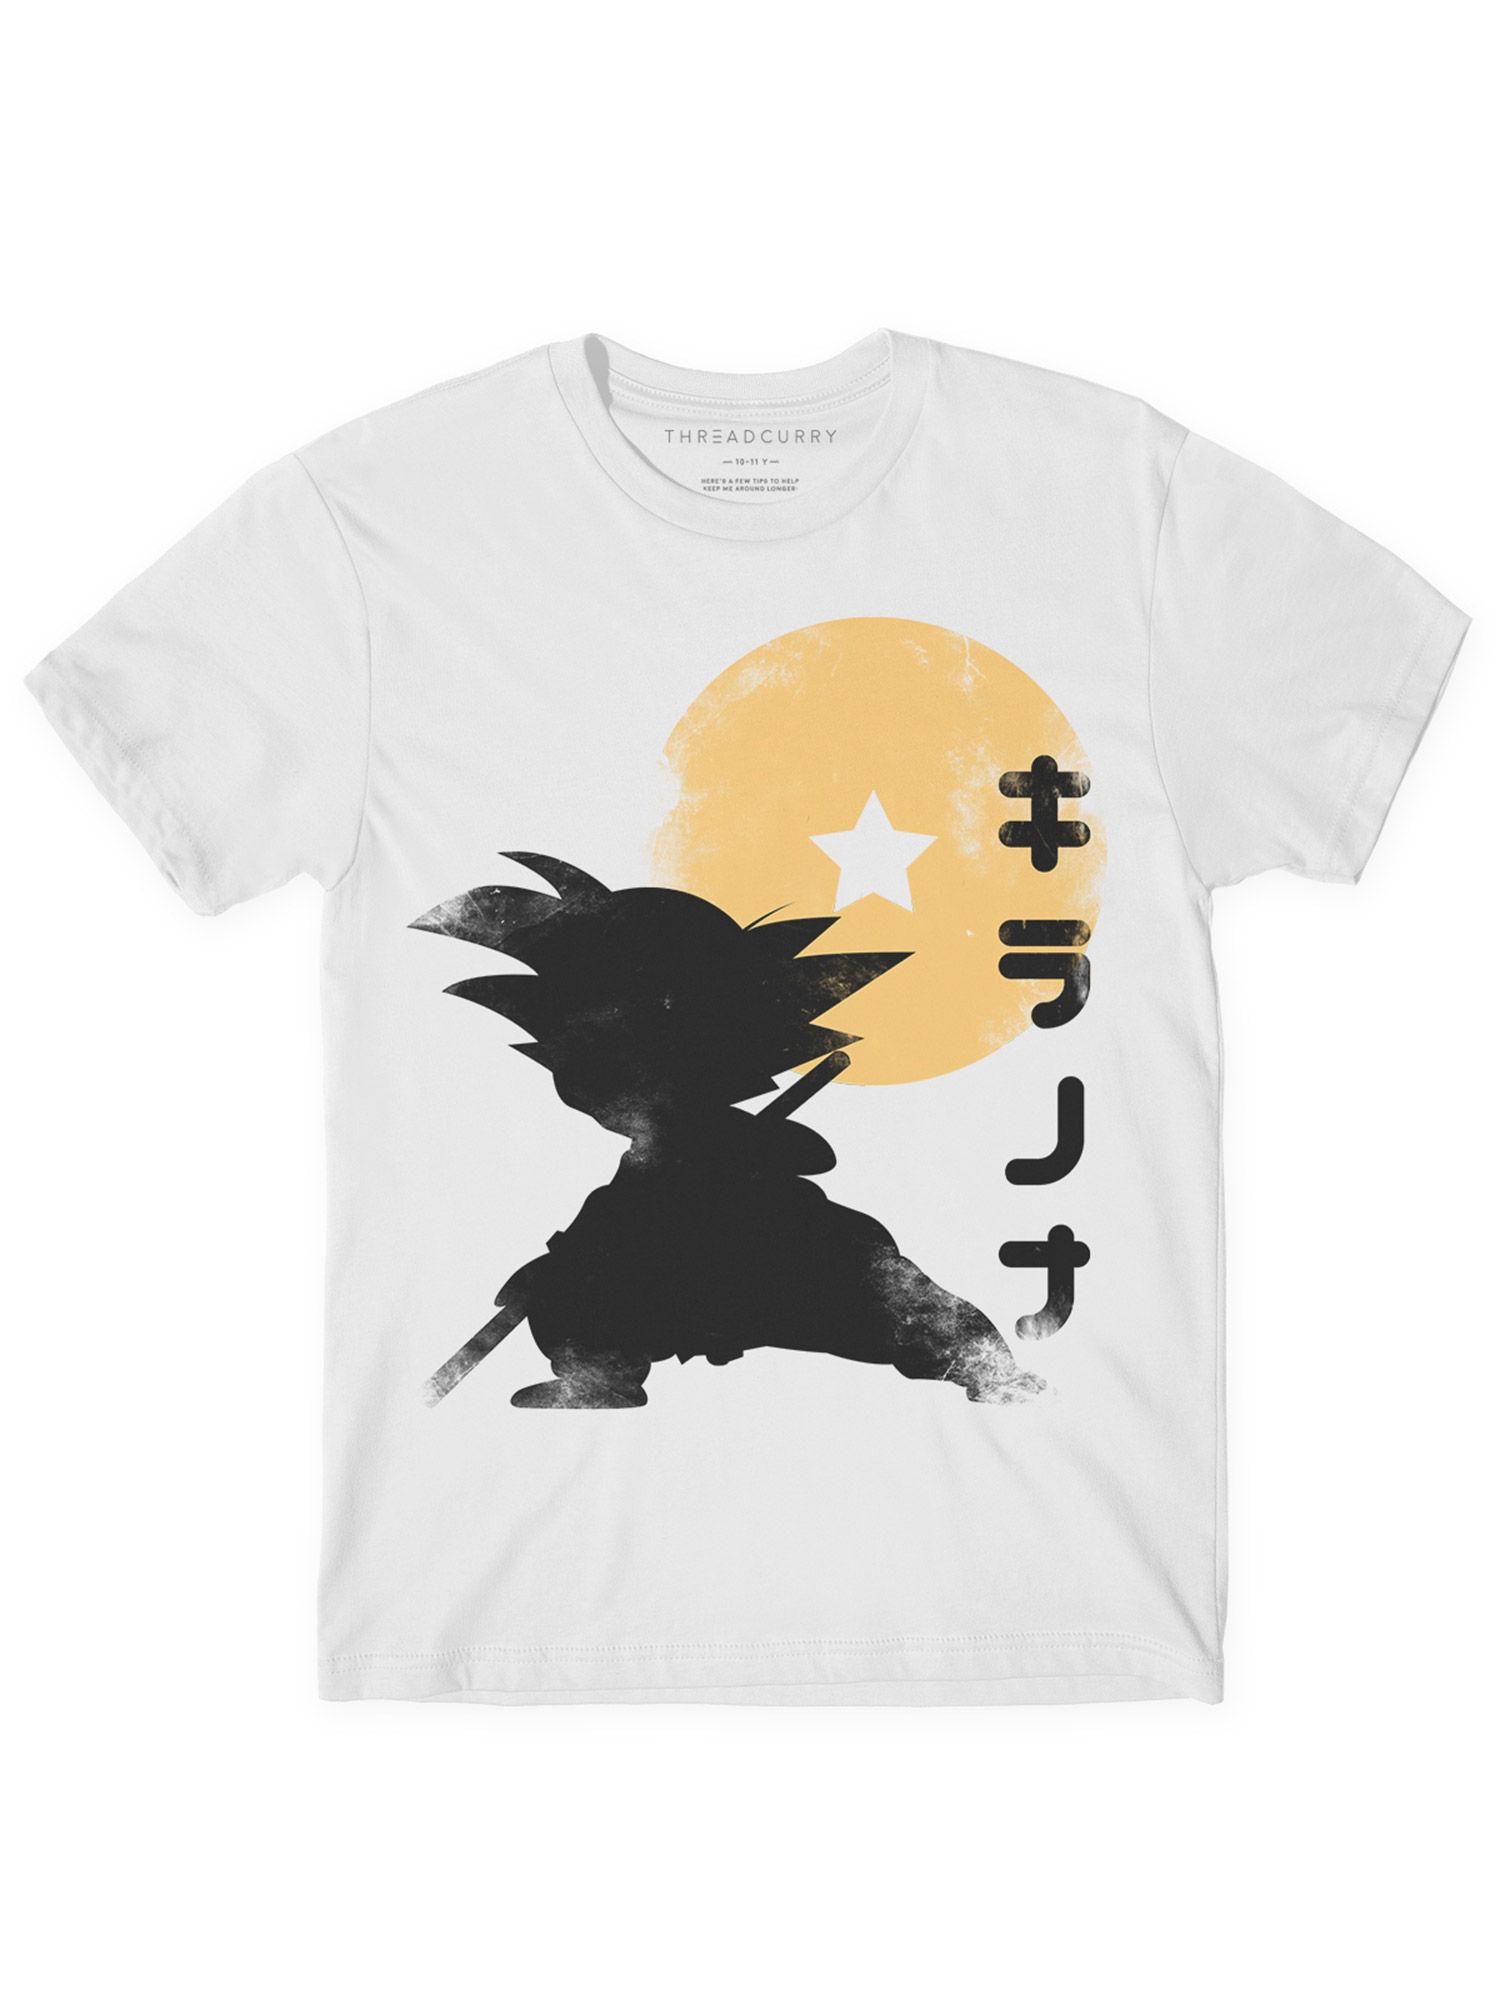 shadow of the warrior boys graphic printed t-shirt - white